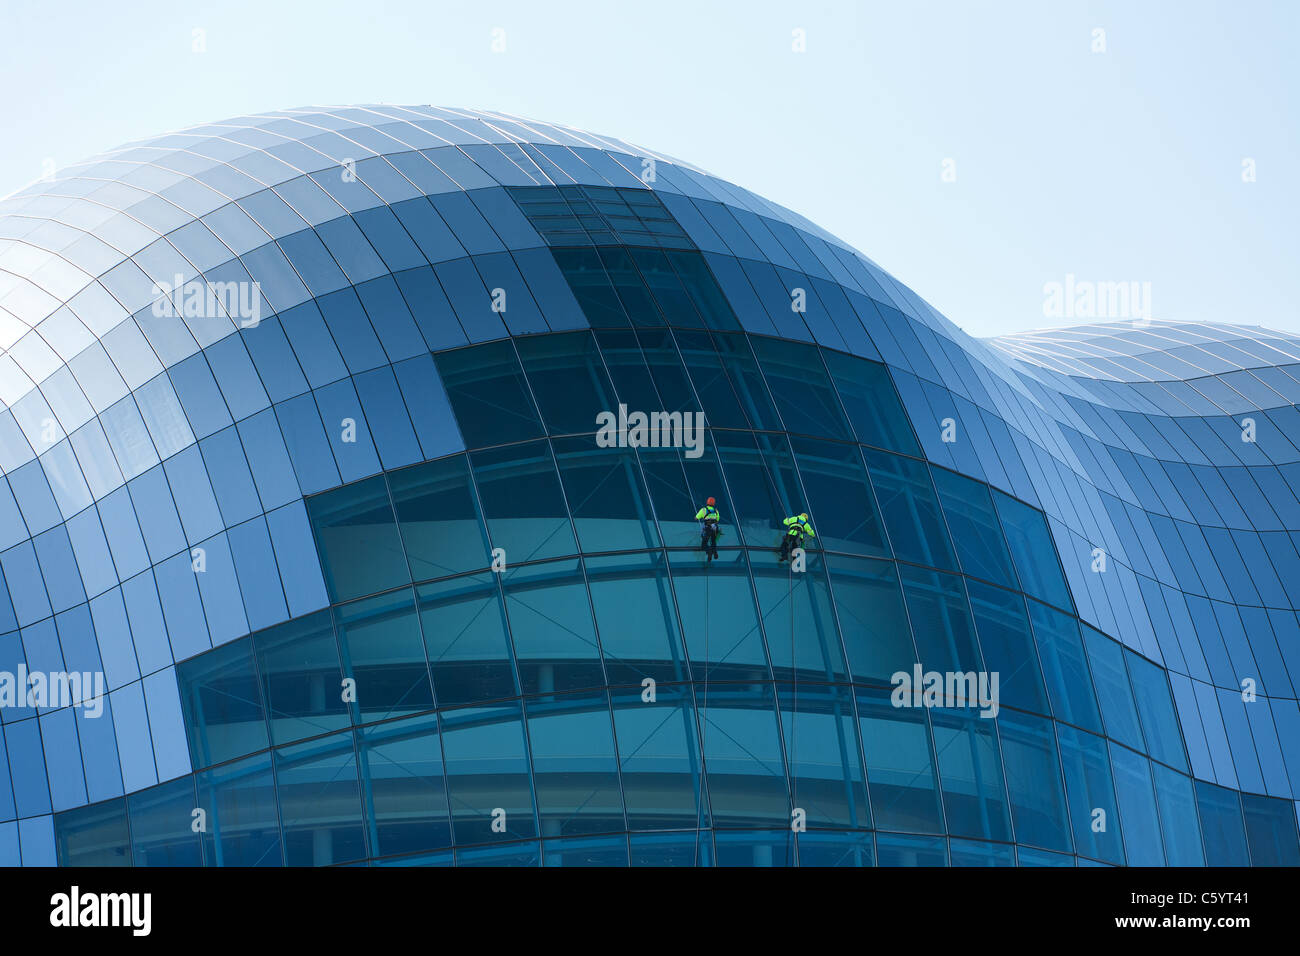 Window Cleaners cleaning the windows of the Sage Building, Gateshead, Newcastle Stock Photo